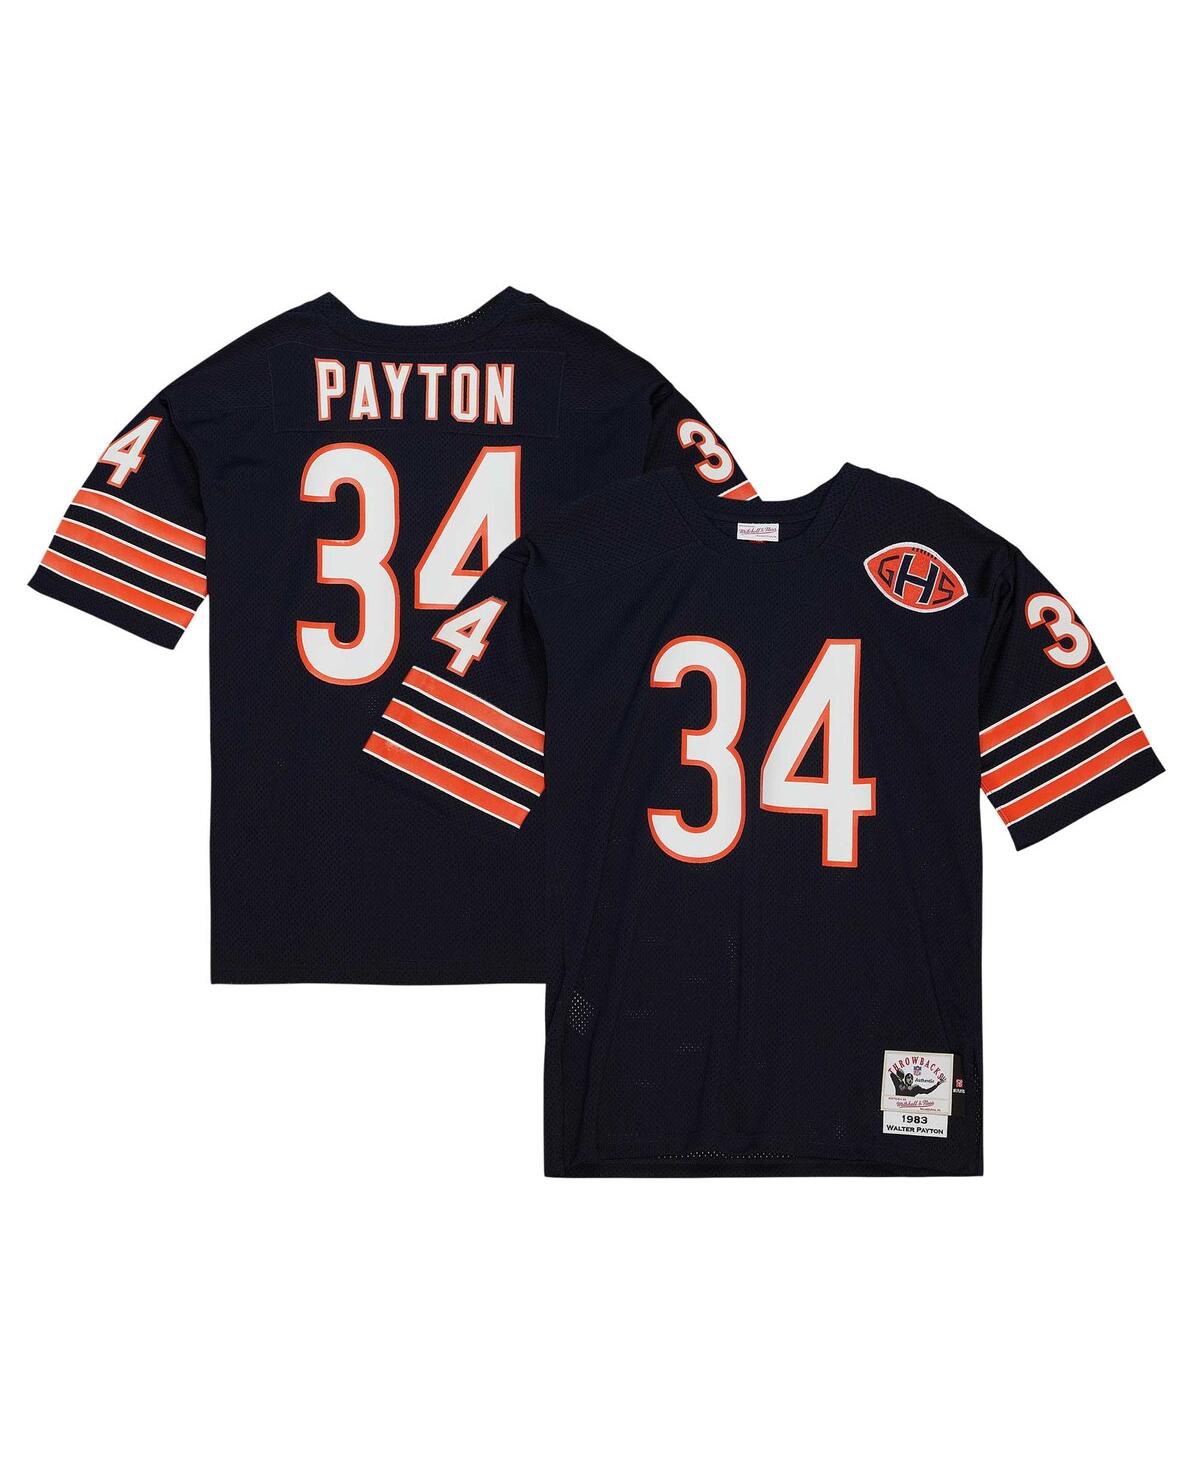 Men's Mitchell & Ness Walter Payton Navy Chicago Bears 1983 Authentic Throwback Retired Player Jersey - Navy